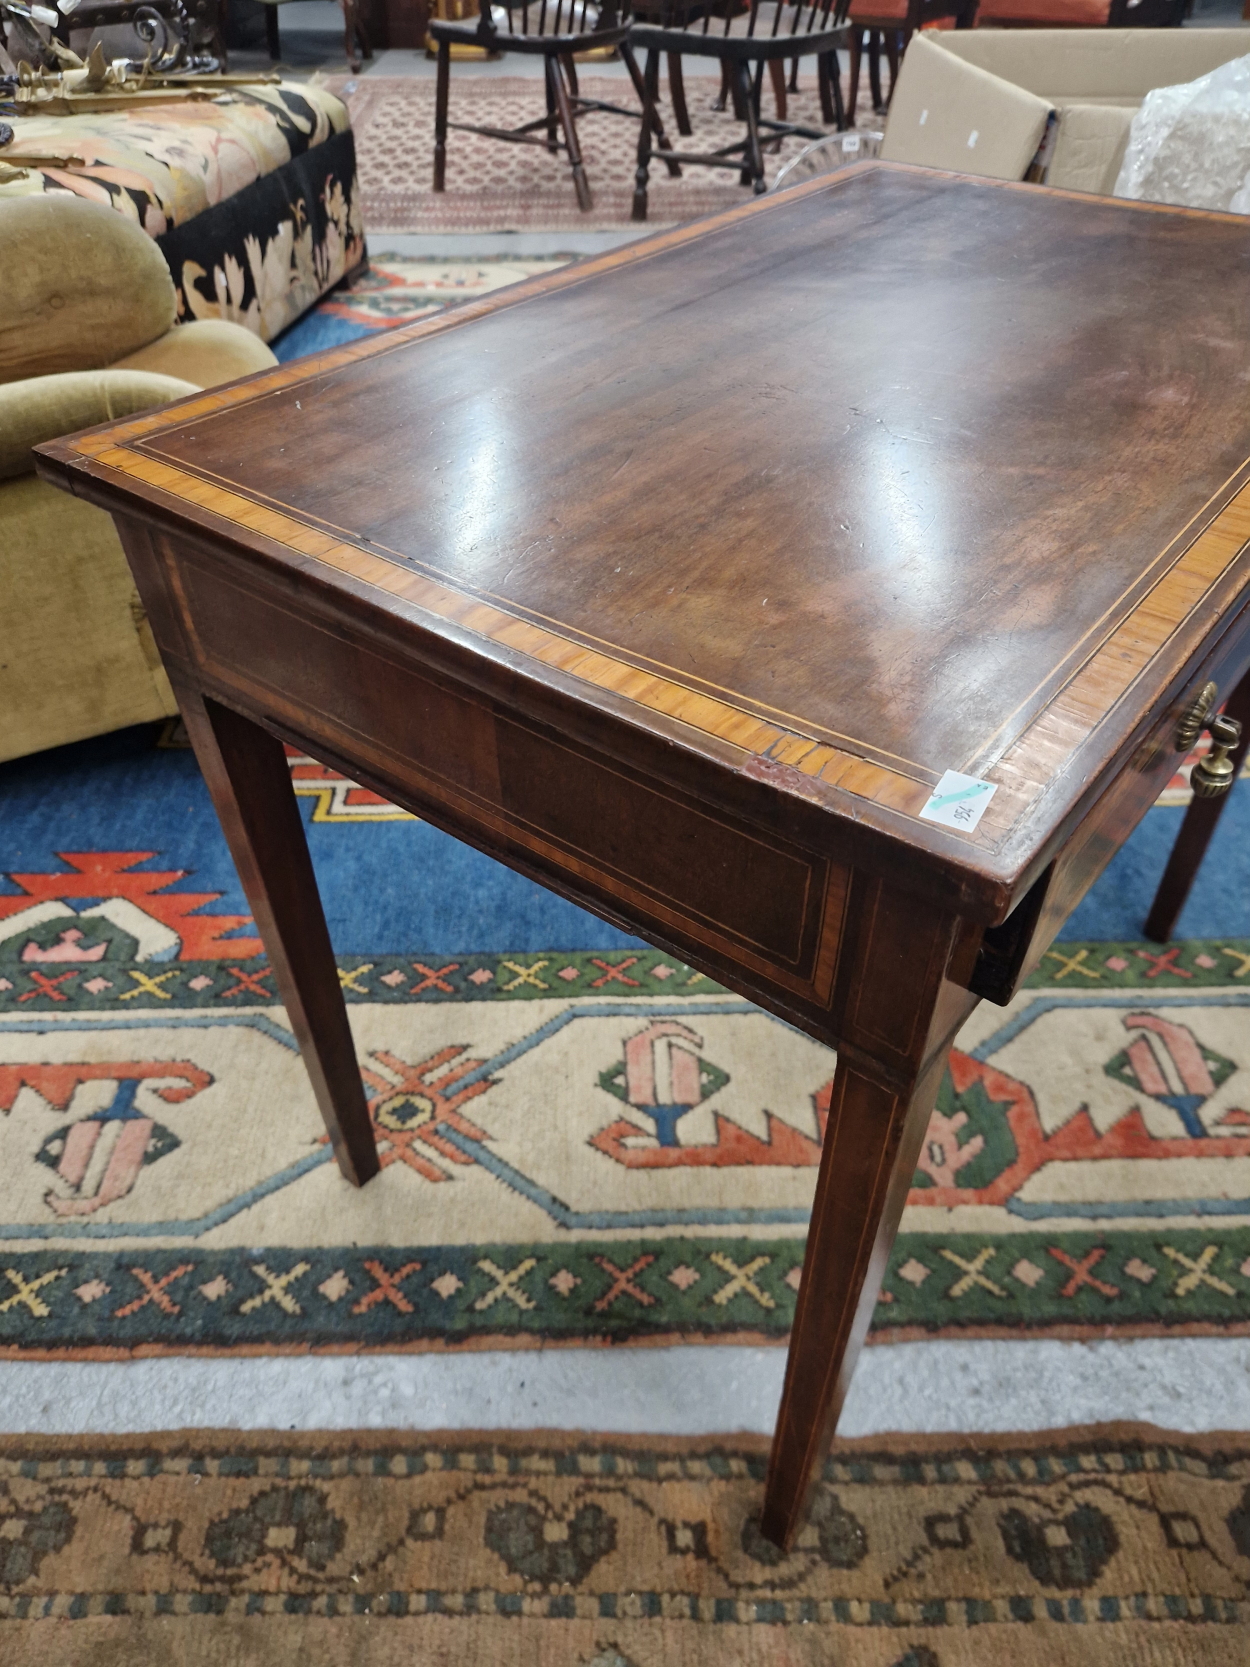 AN ANTIQUE SATIN WOOD BANDED MAHOGANY SIDE TABLE WITH A SINGLE DRAWER ABOVE THE LINE INLAID TAPERING - Image 3 of 5